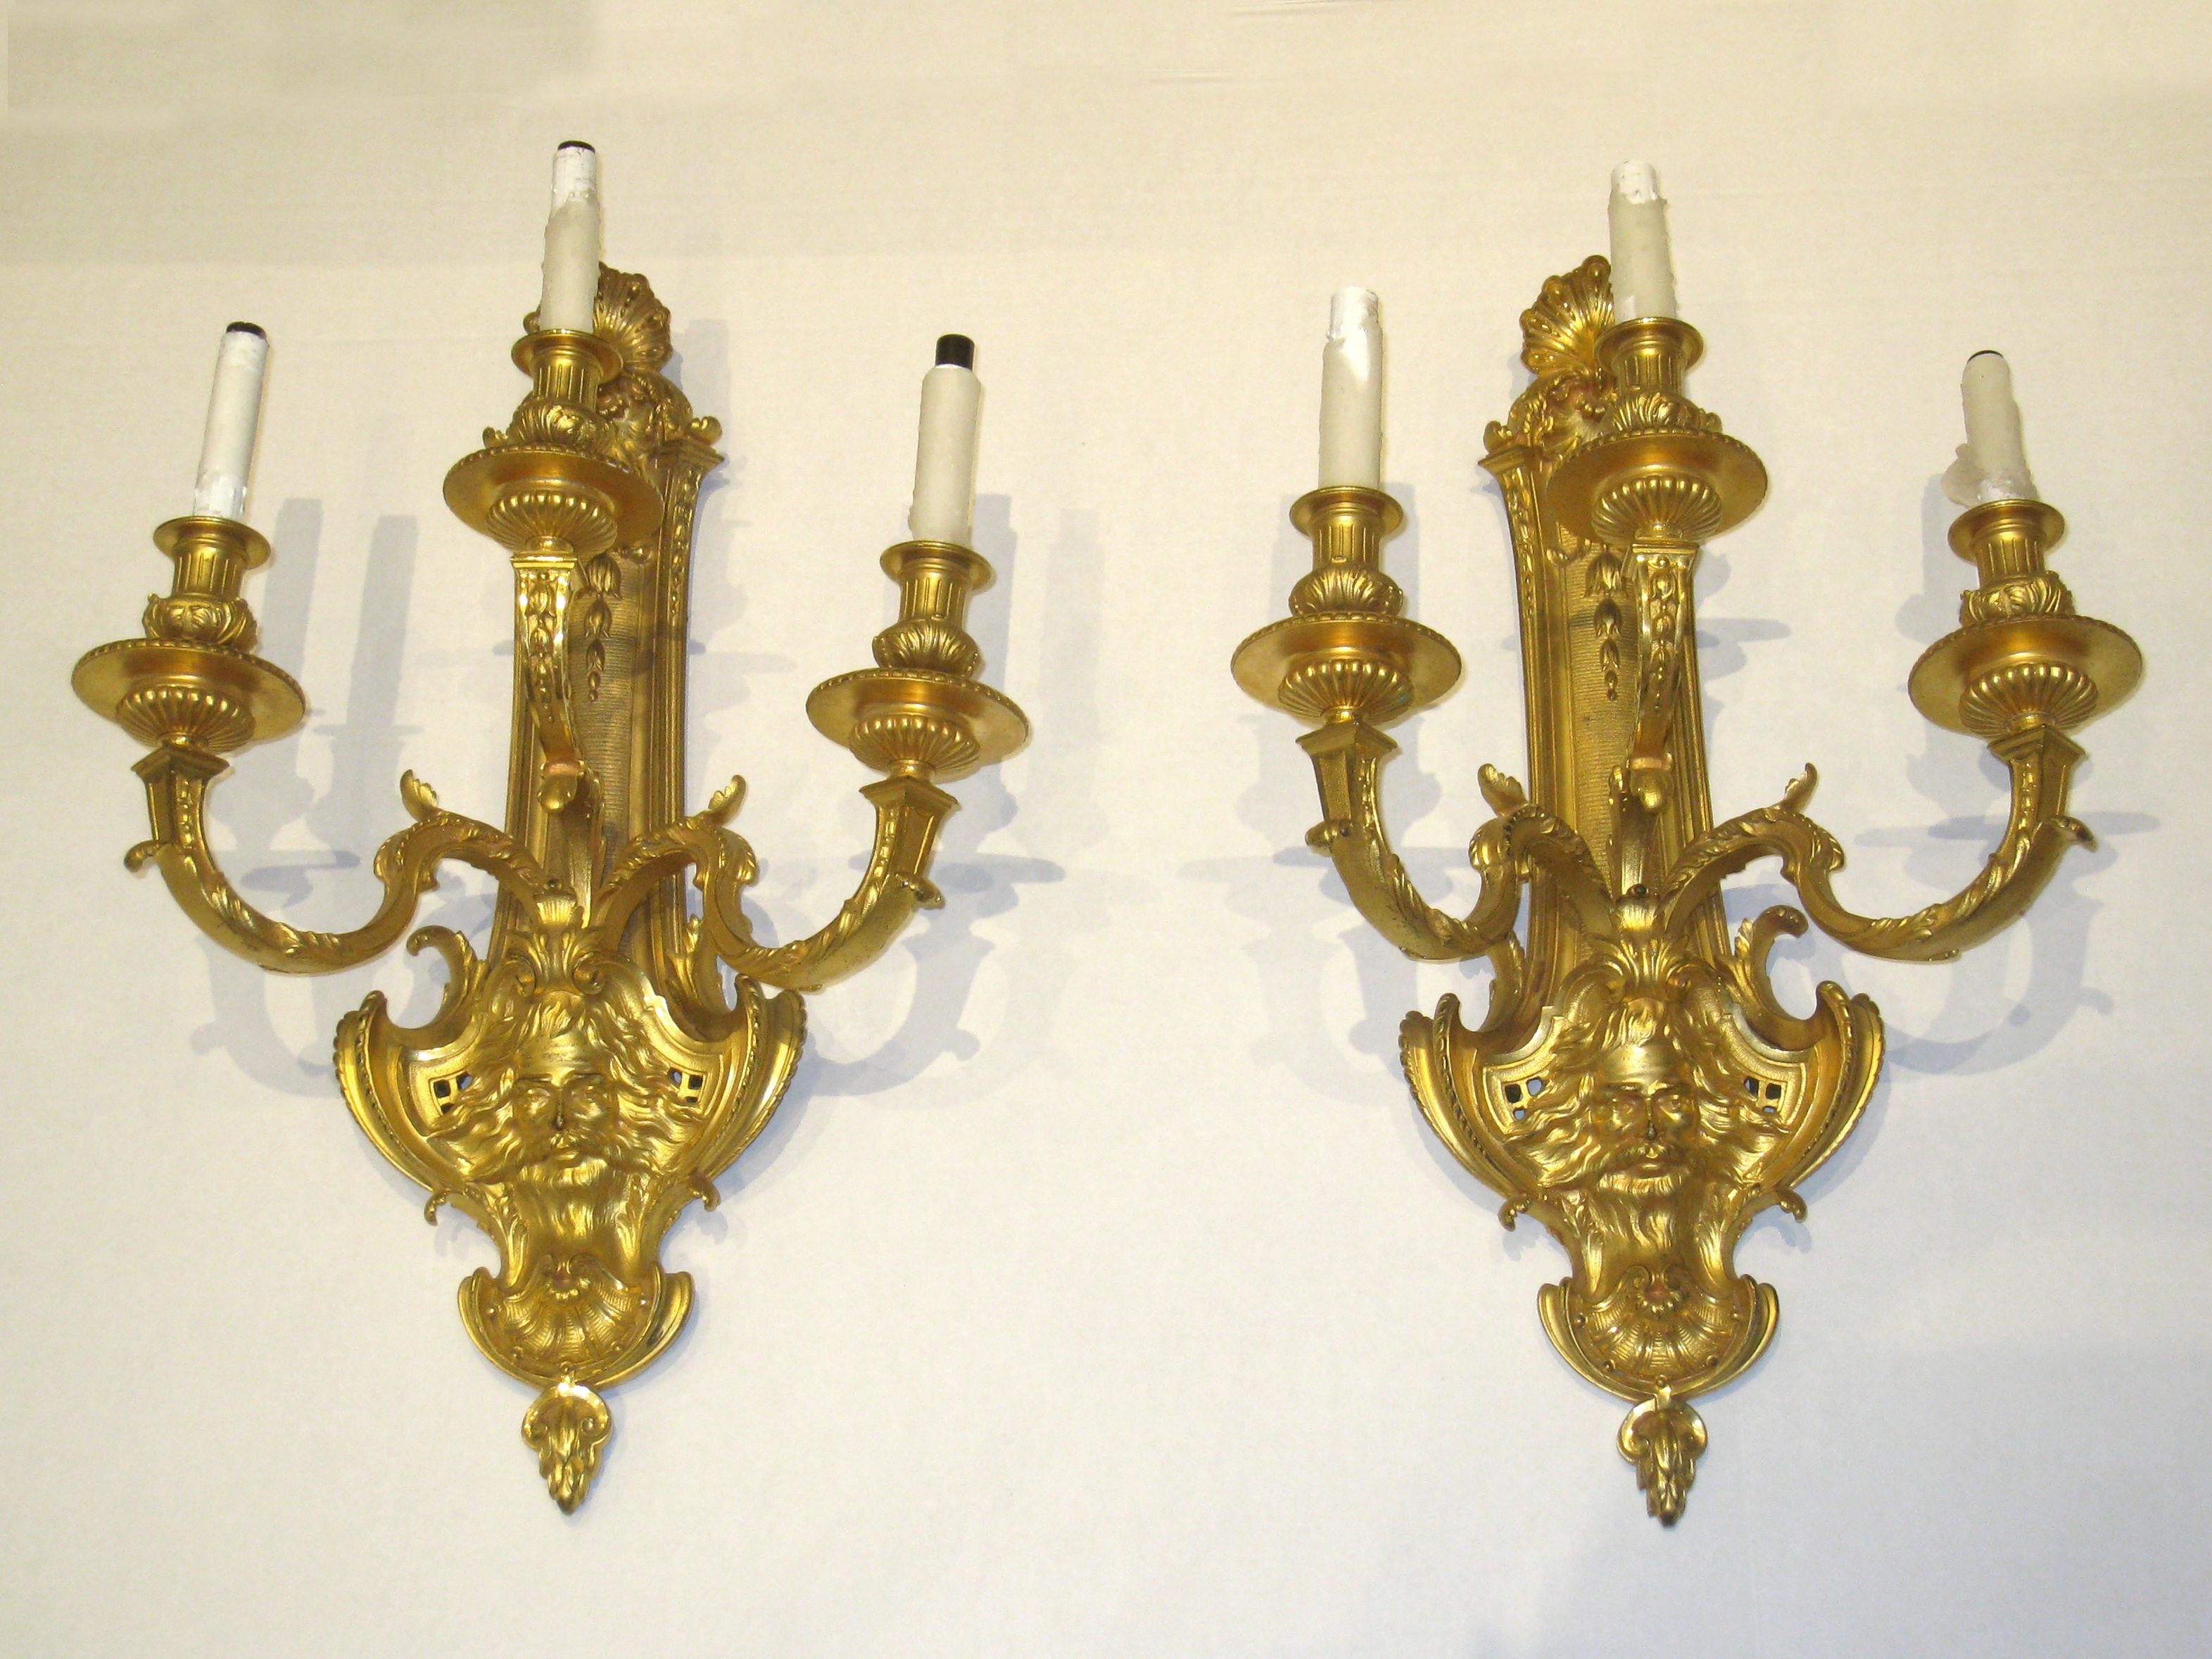 Pair of finest quality French 19th century Louis XV style gilt bronze 3-light sconces.